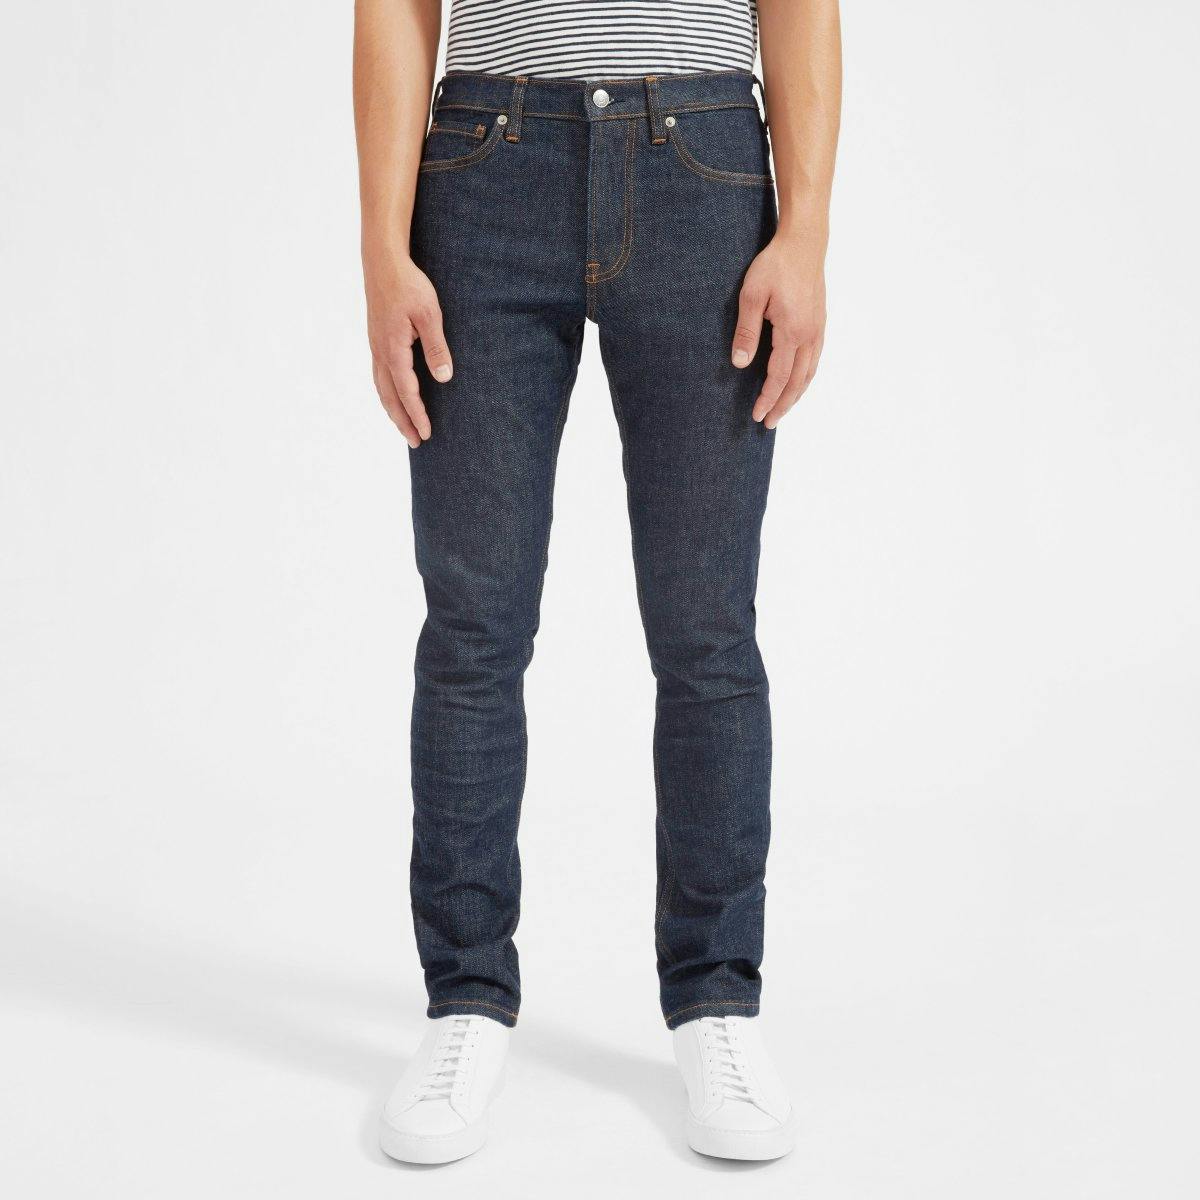 Best Jeans For Tall Skinny Guys [May 2021] - Editor - 12 Jeans for Tall Men